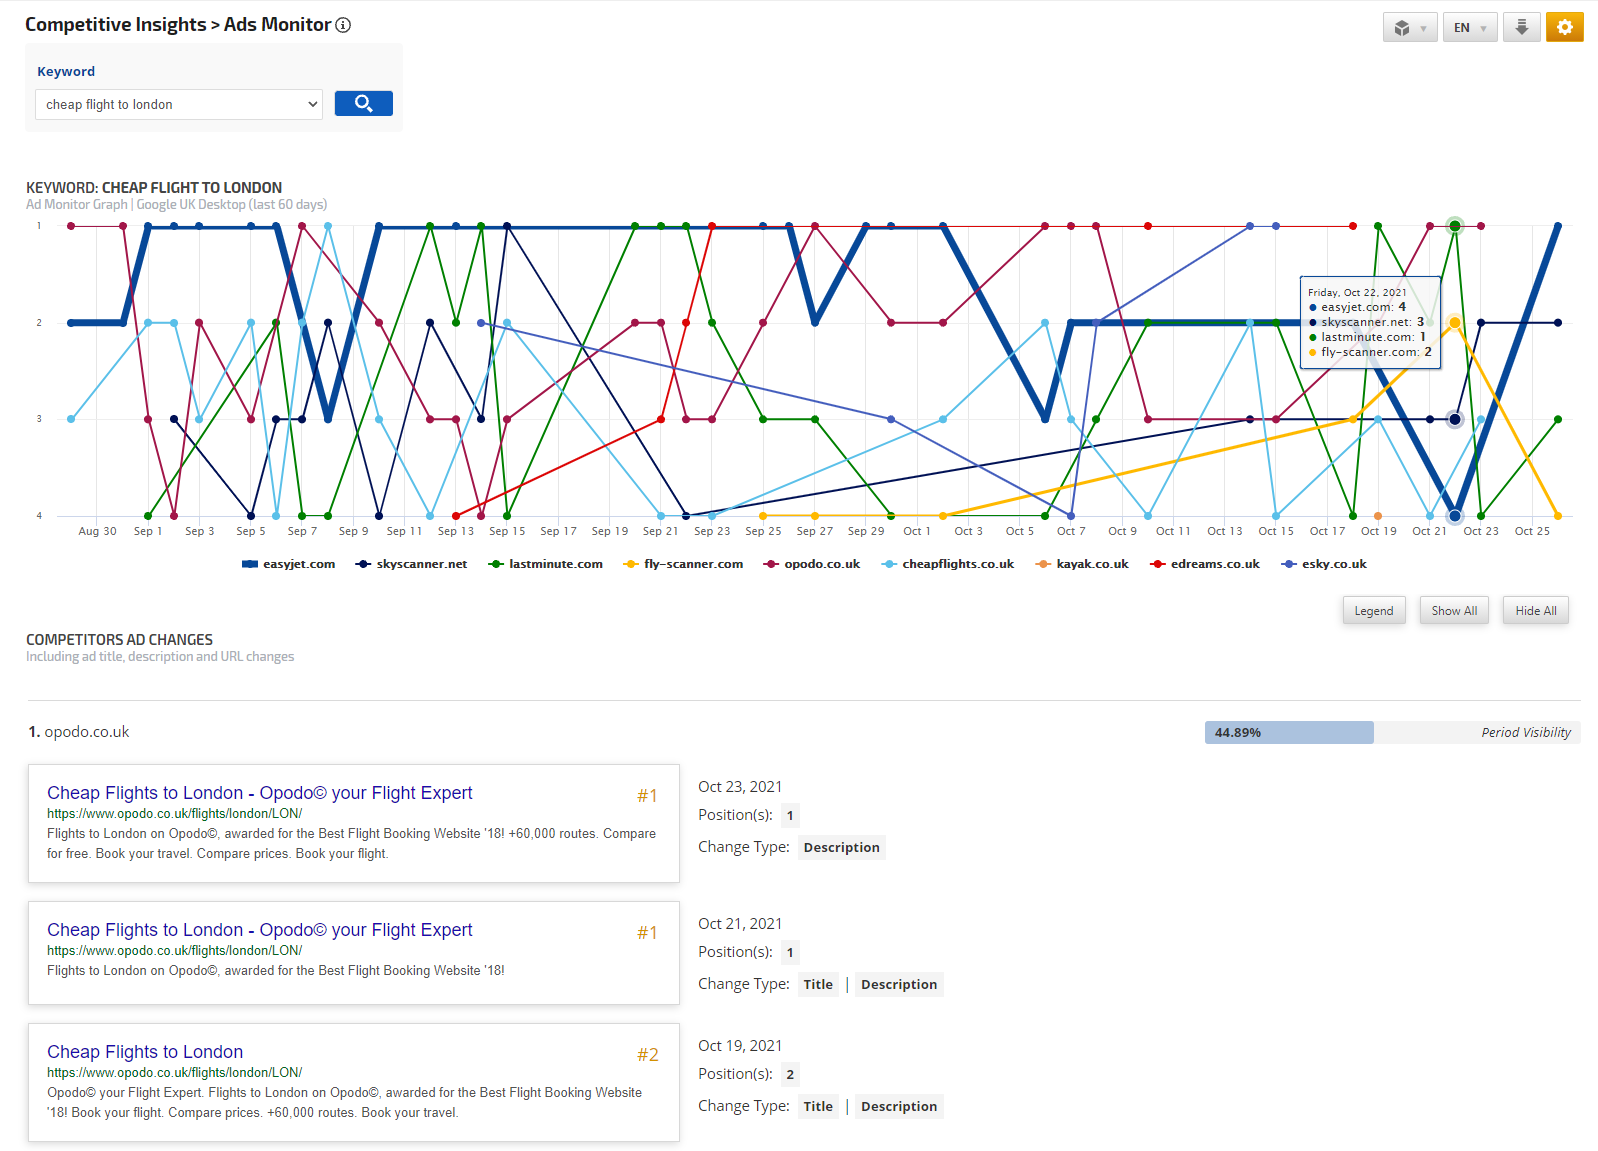 The AdWords Monitor 